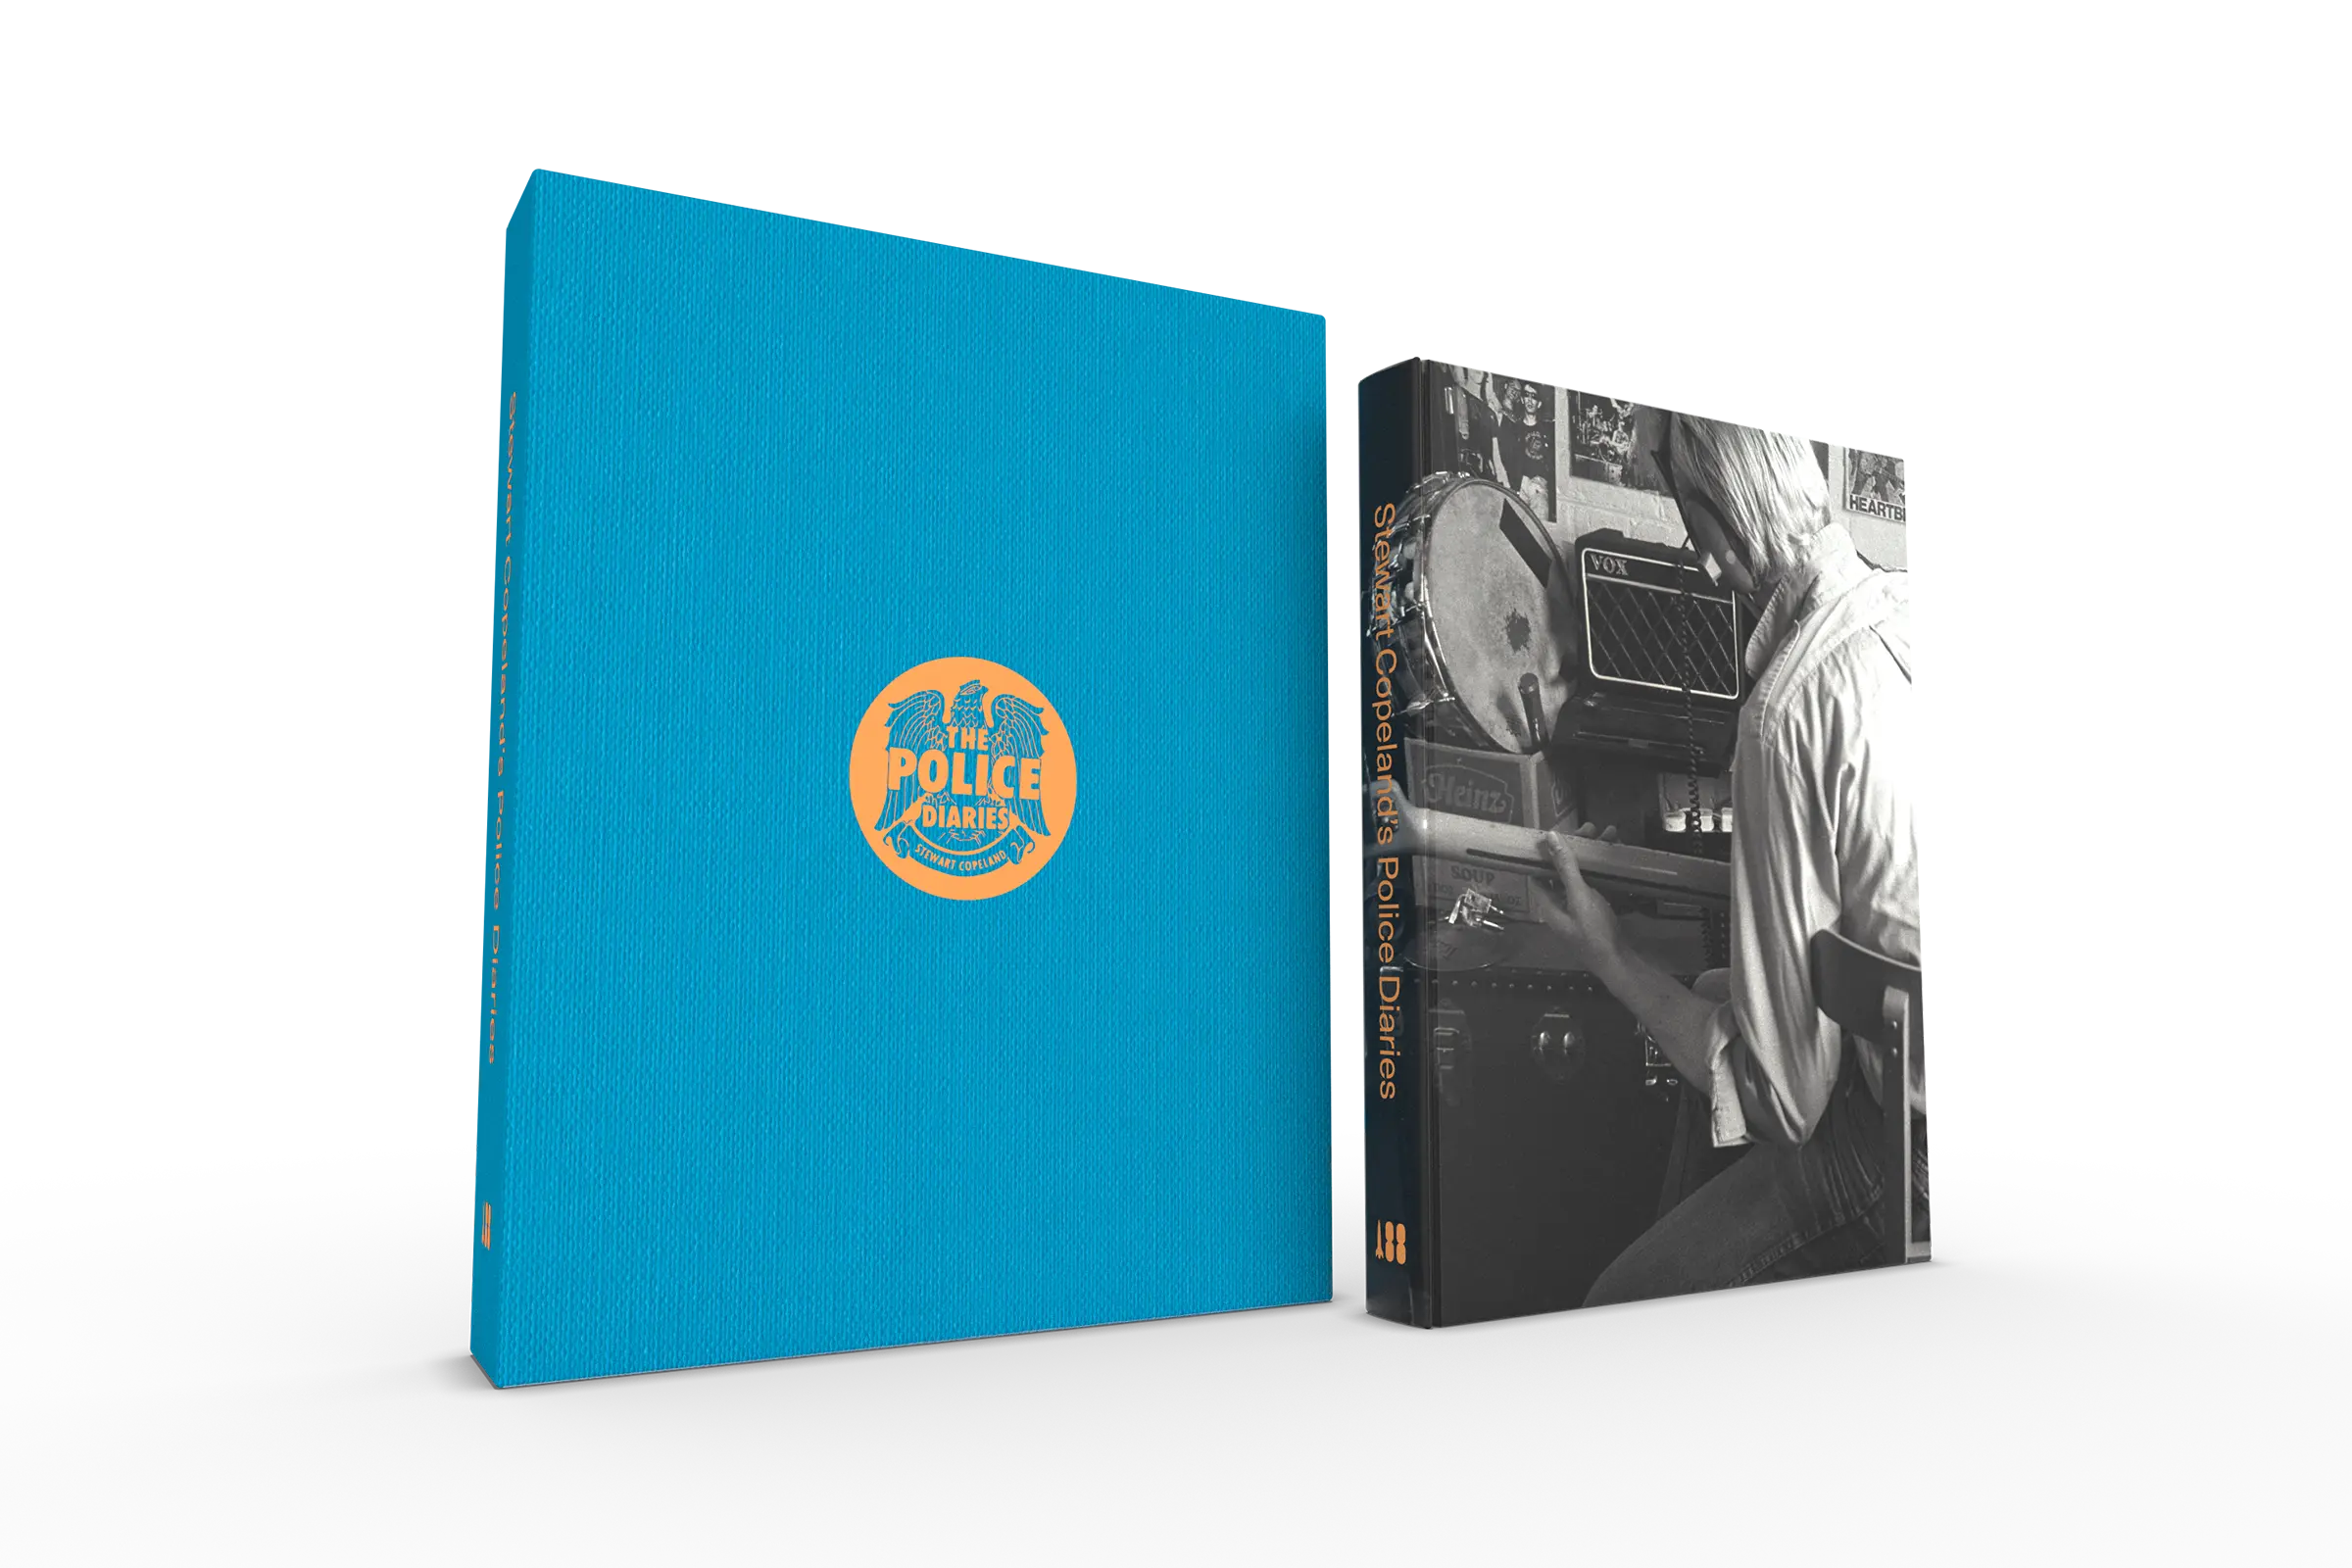 Stewart Copeland's Police Diaries, published by Rocket 88